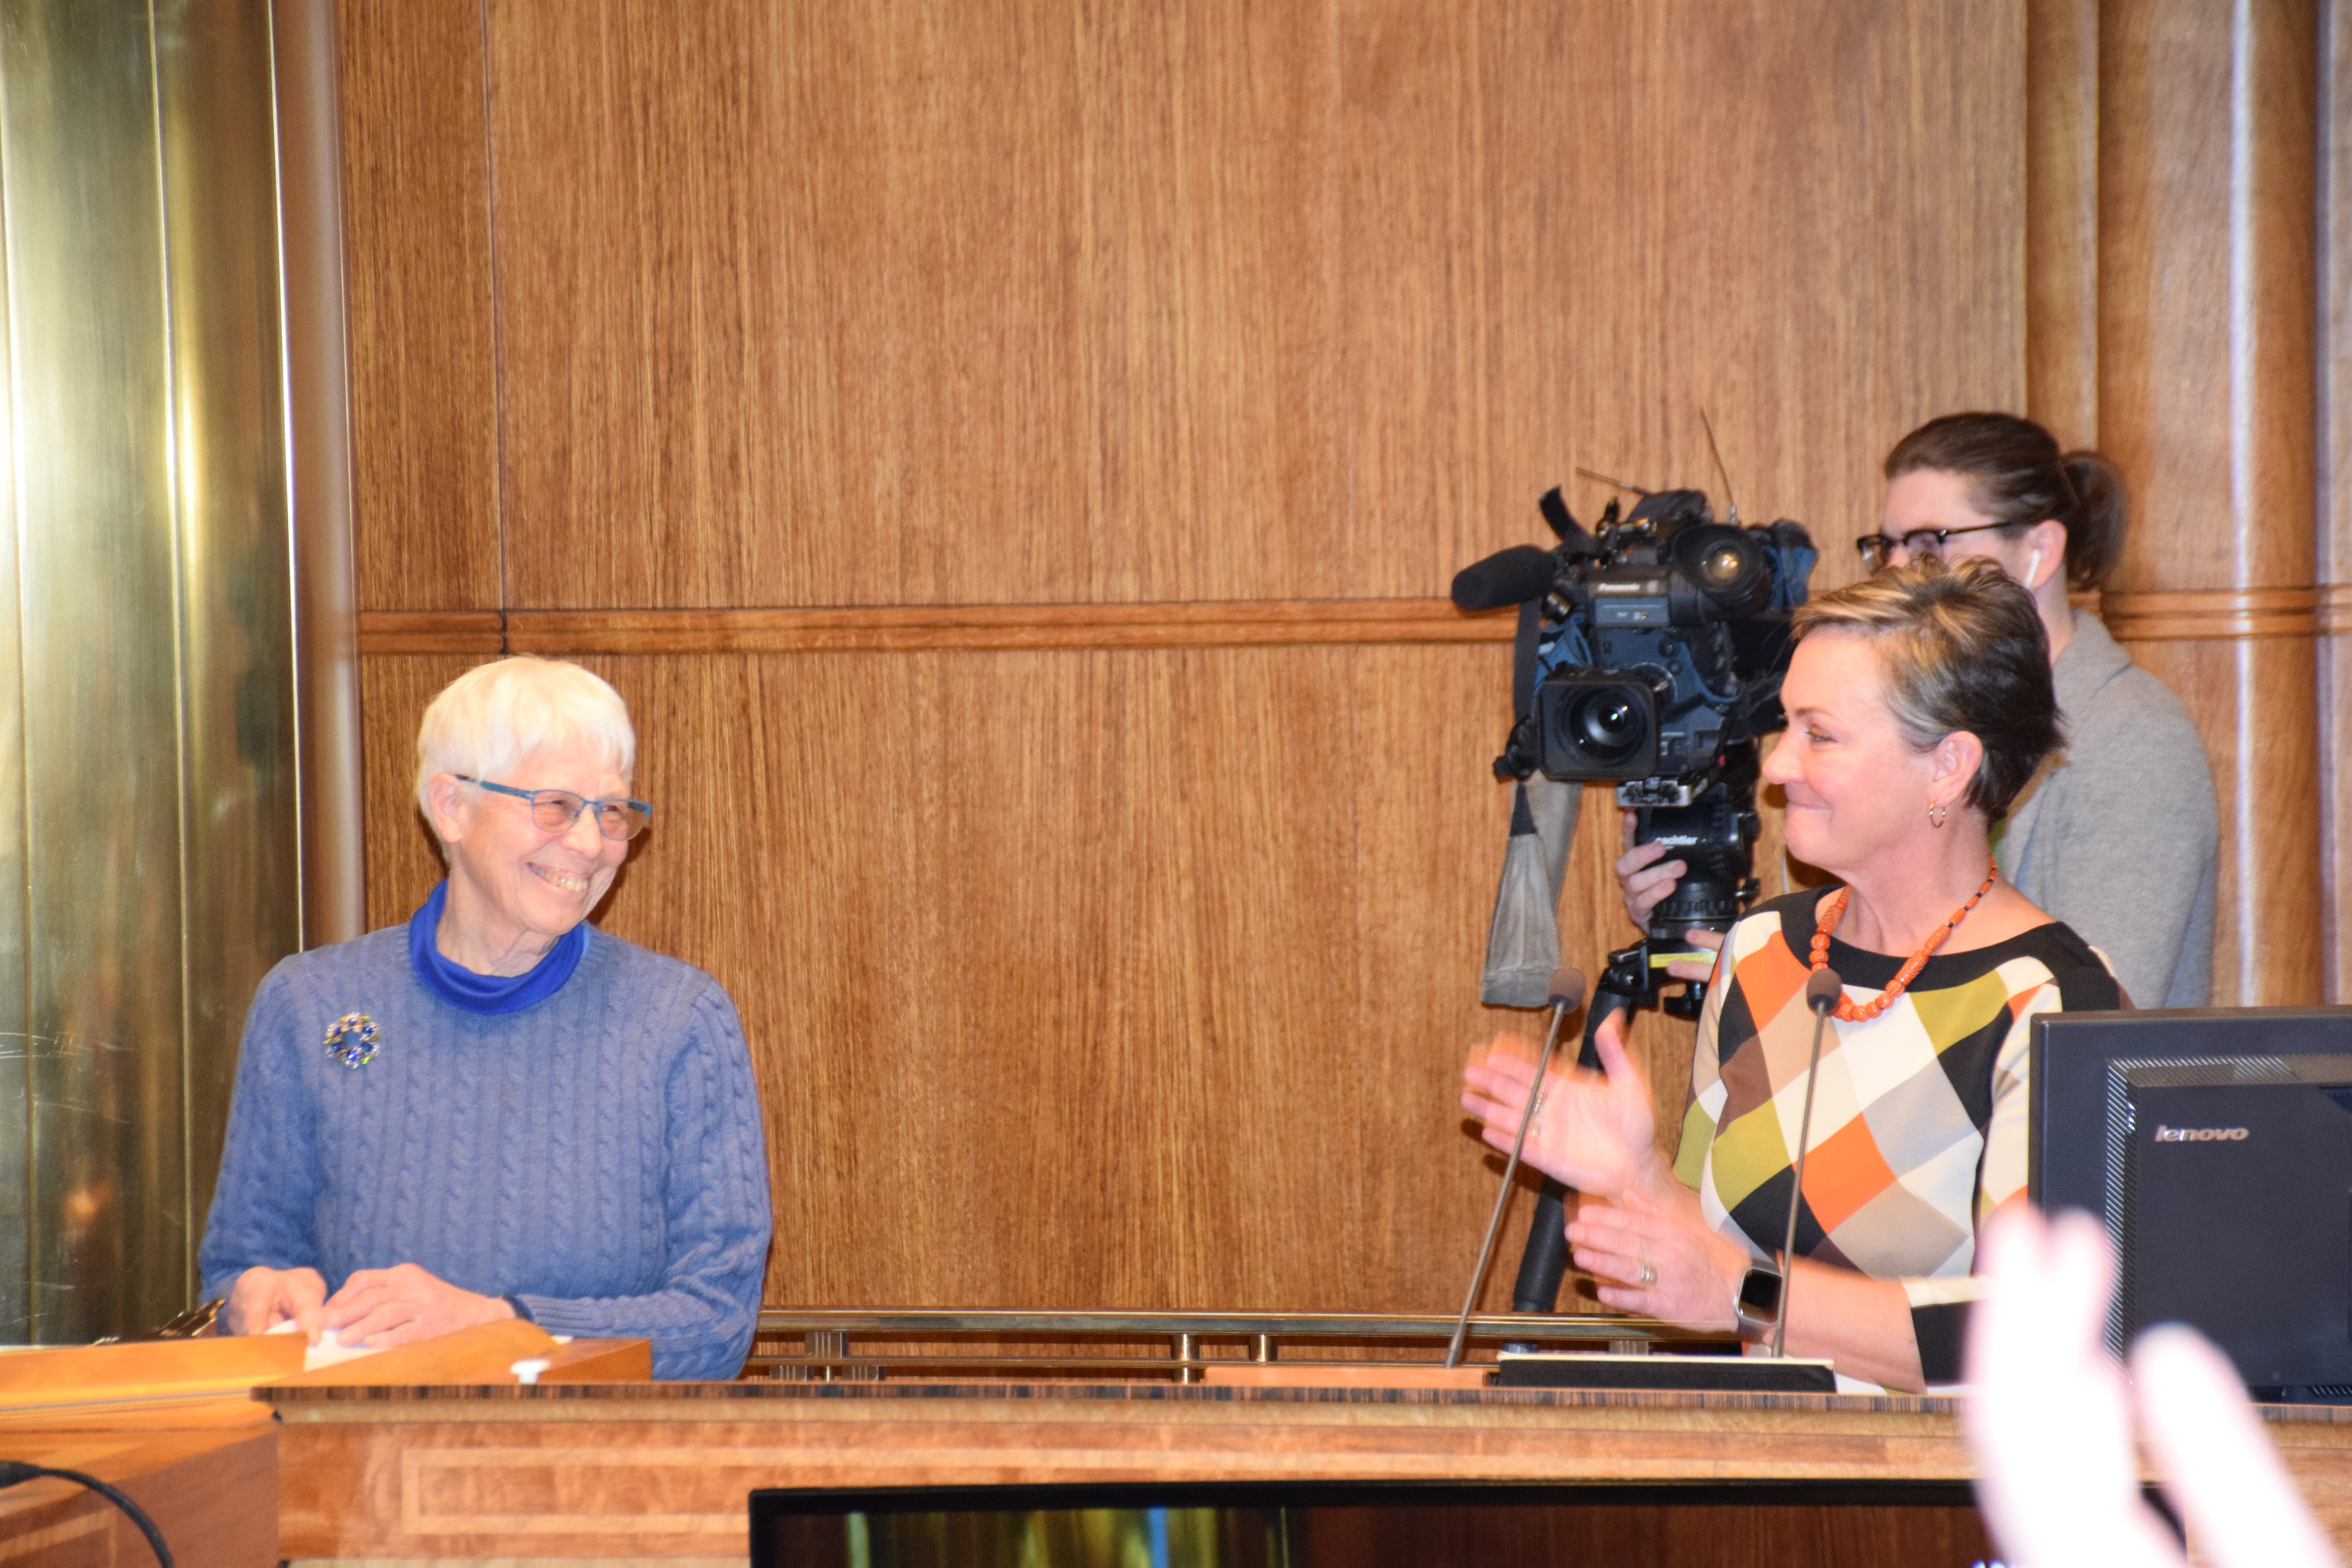 A woman applauds another woman to her right while standing at a podium. The woman on the right smiles back. Behind them, a cameraman.